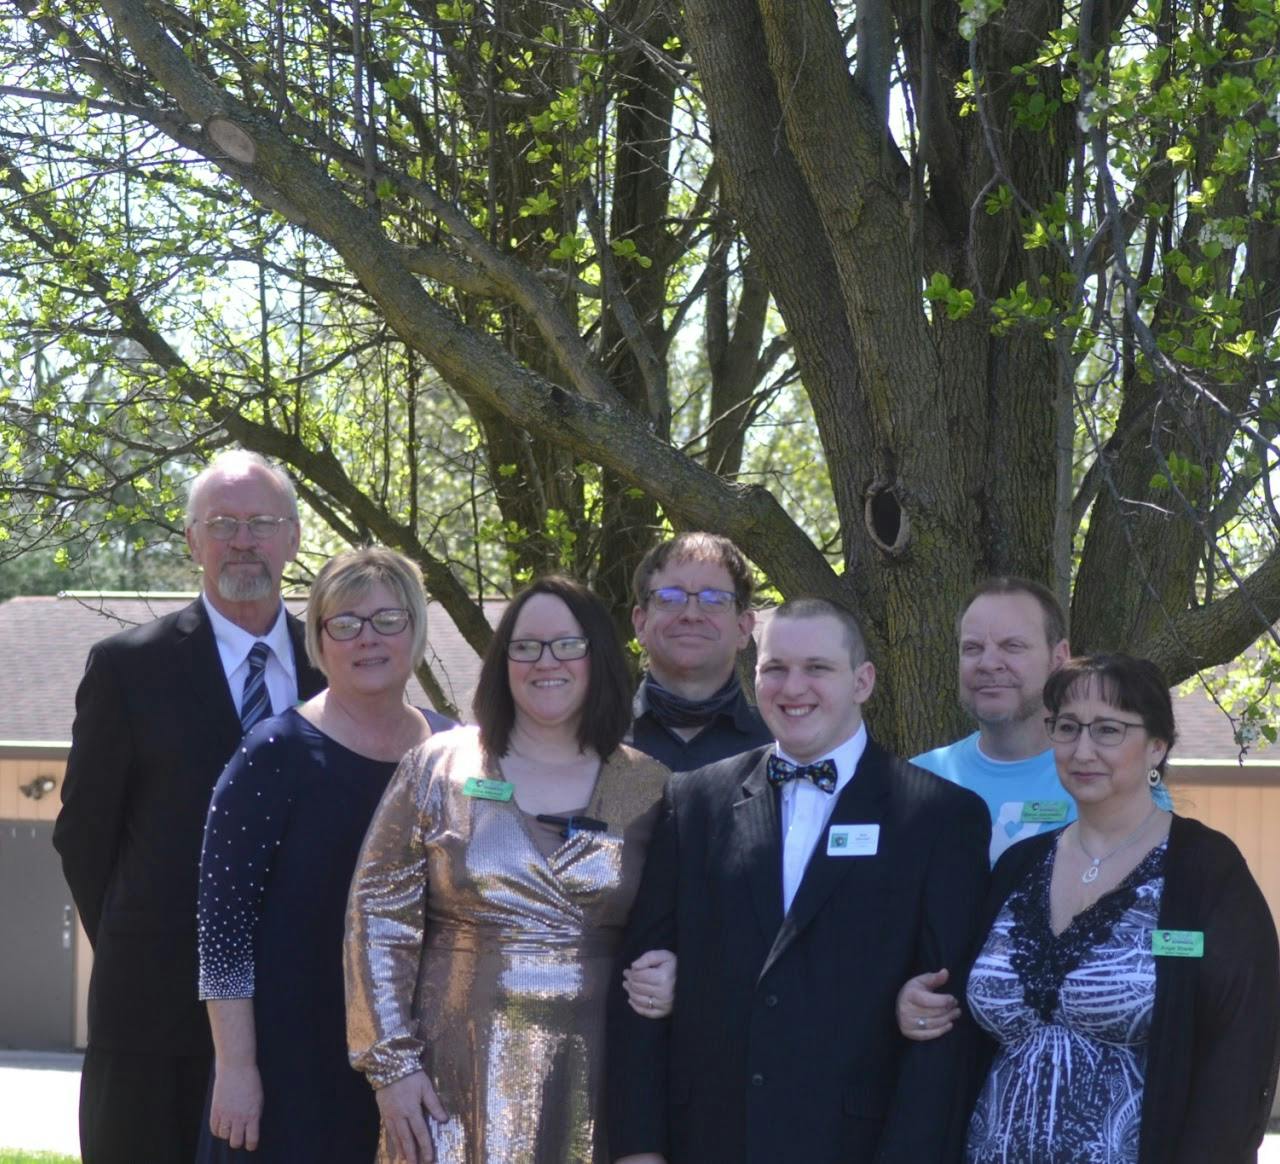 Sam and Gina standing with the Board of Directors in front of a tree.